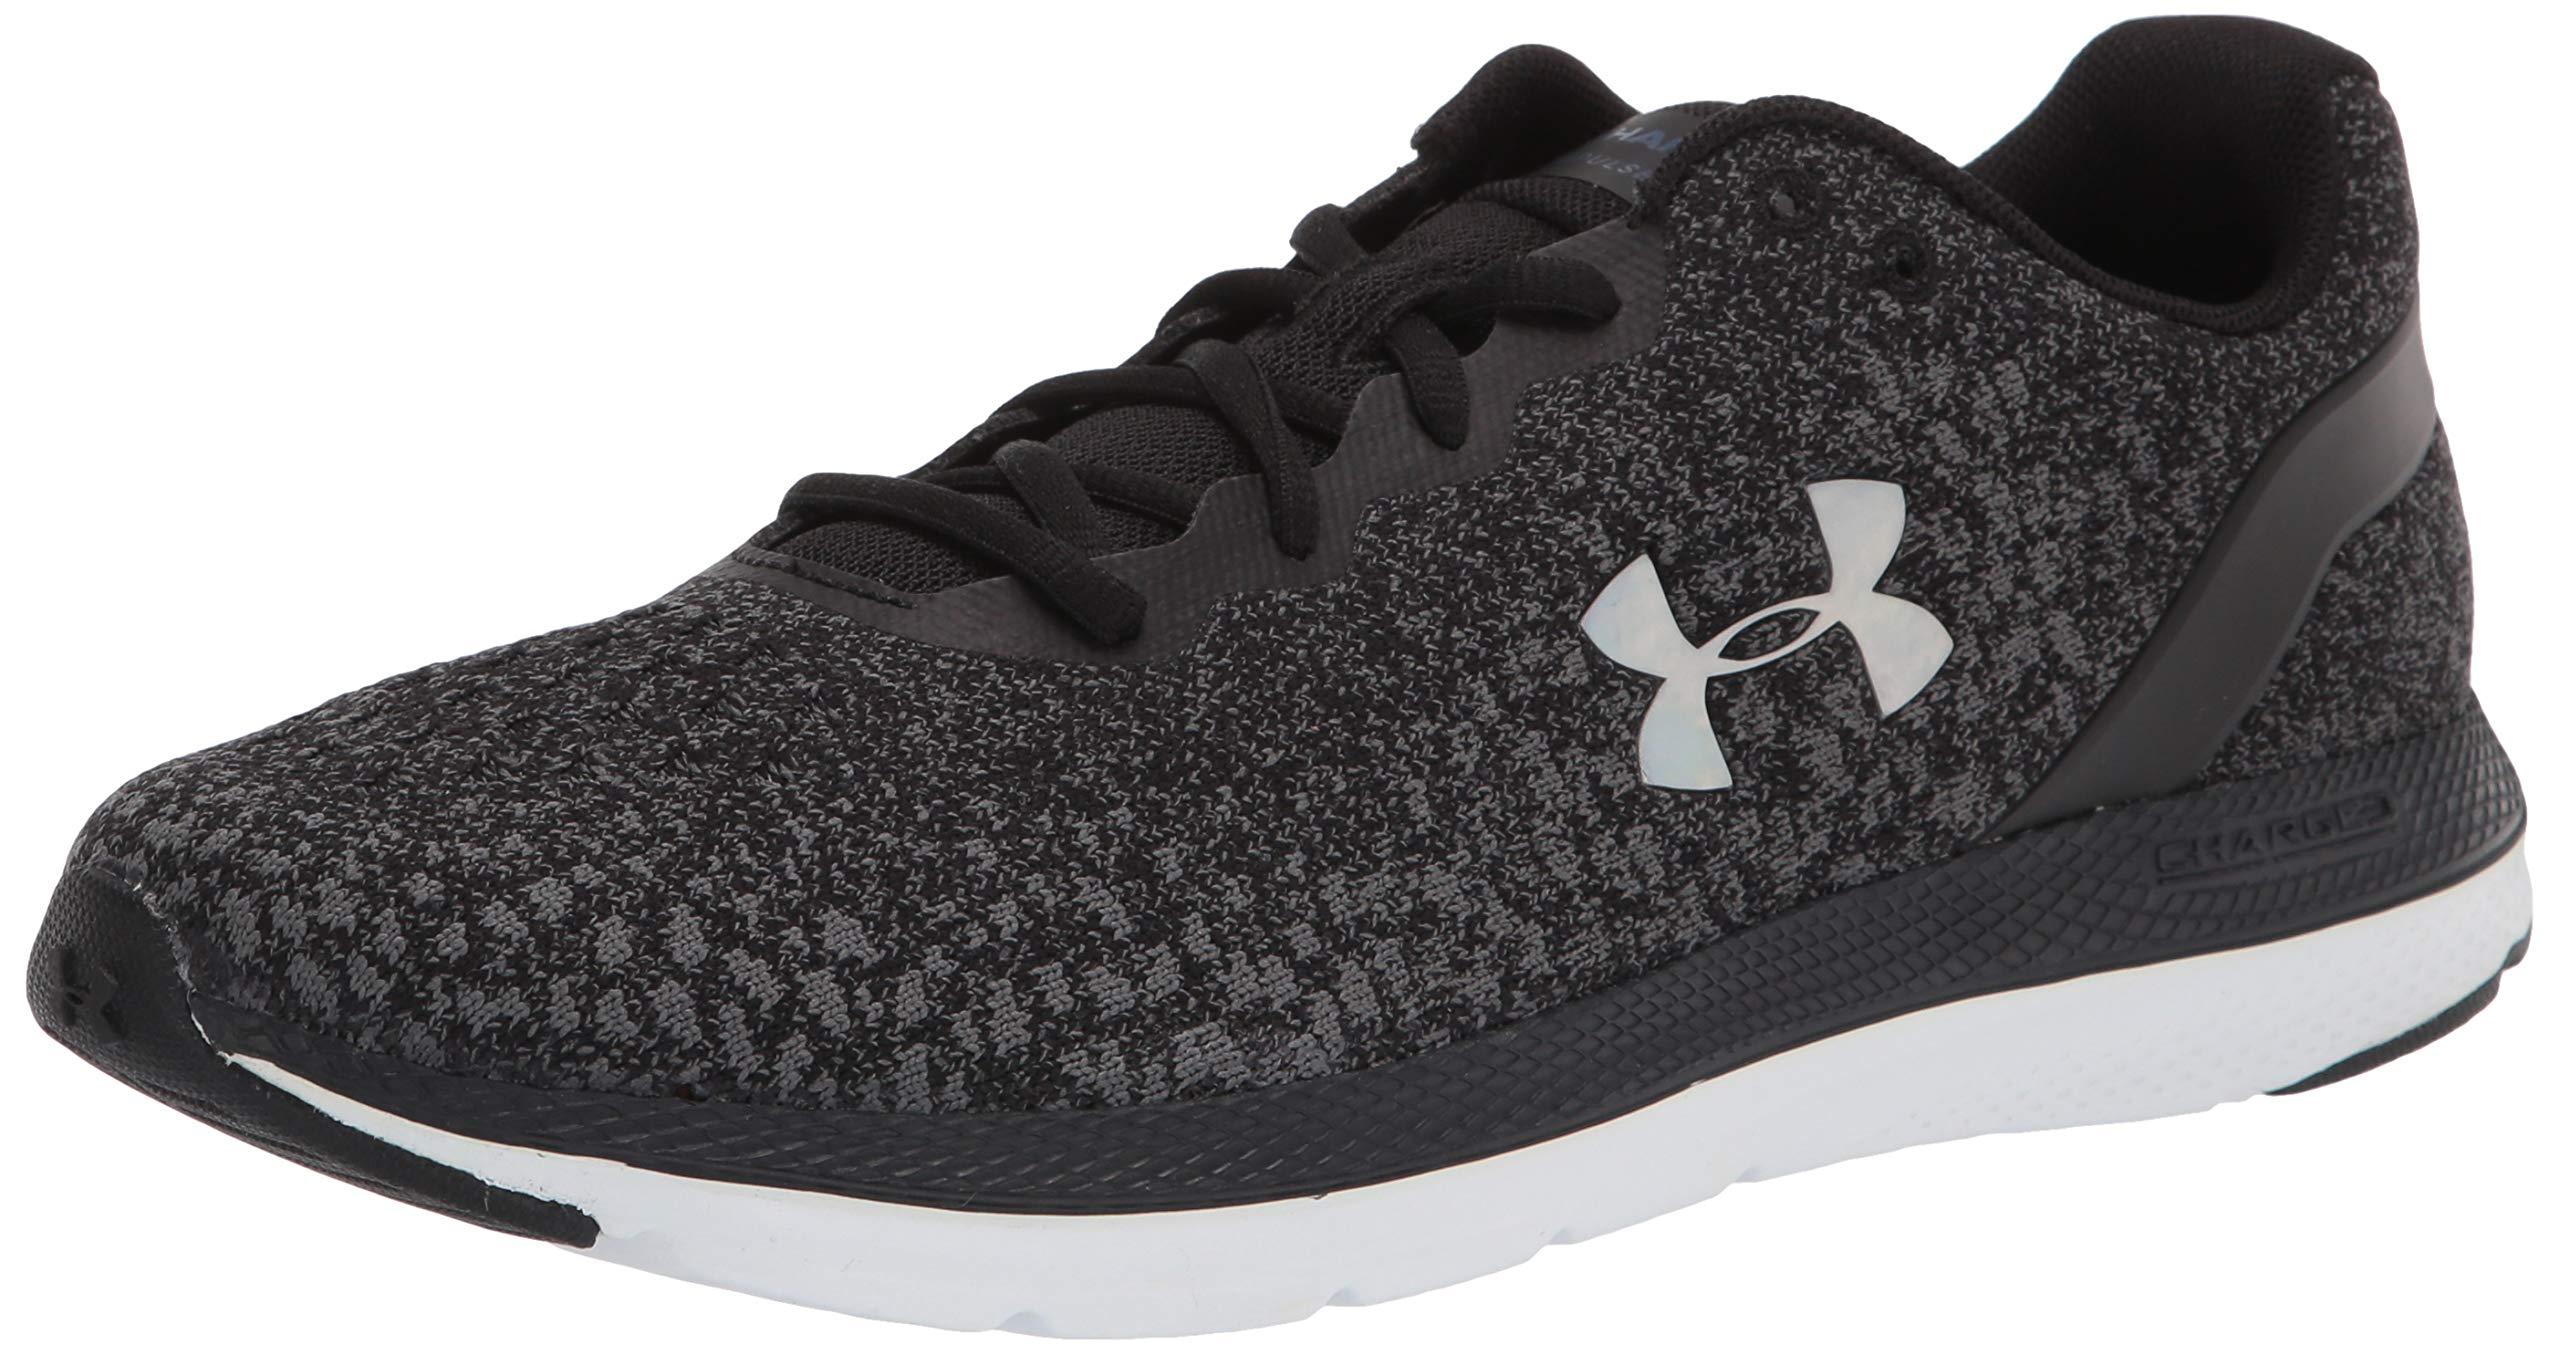 Under Armour Rubber Charged Impulse Knit Running Shoe in Black - Save 2 ...